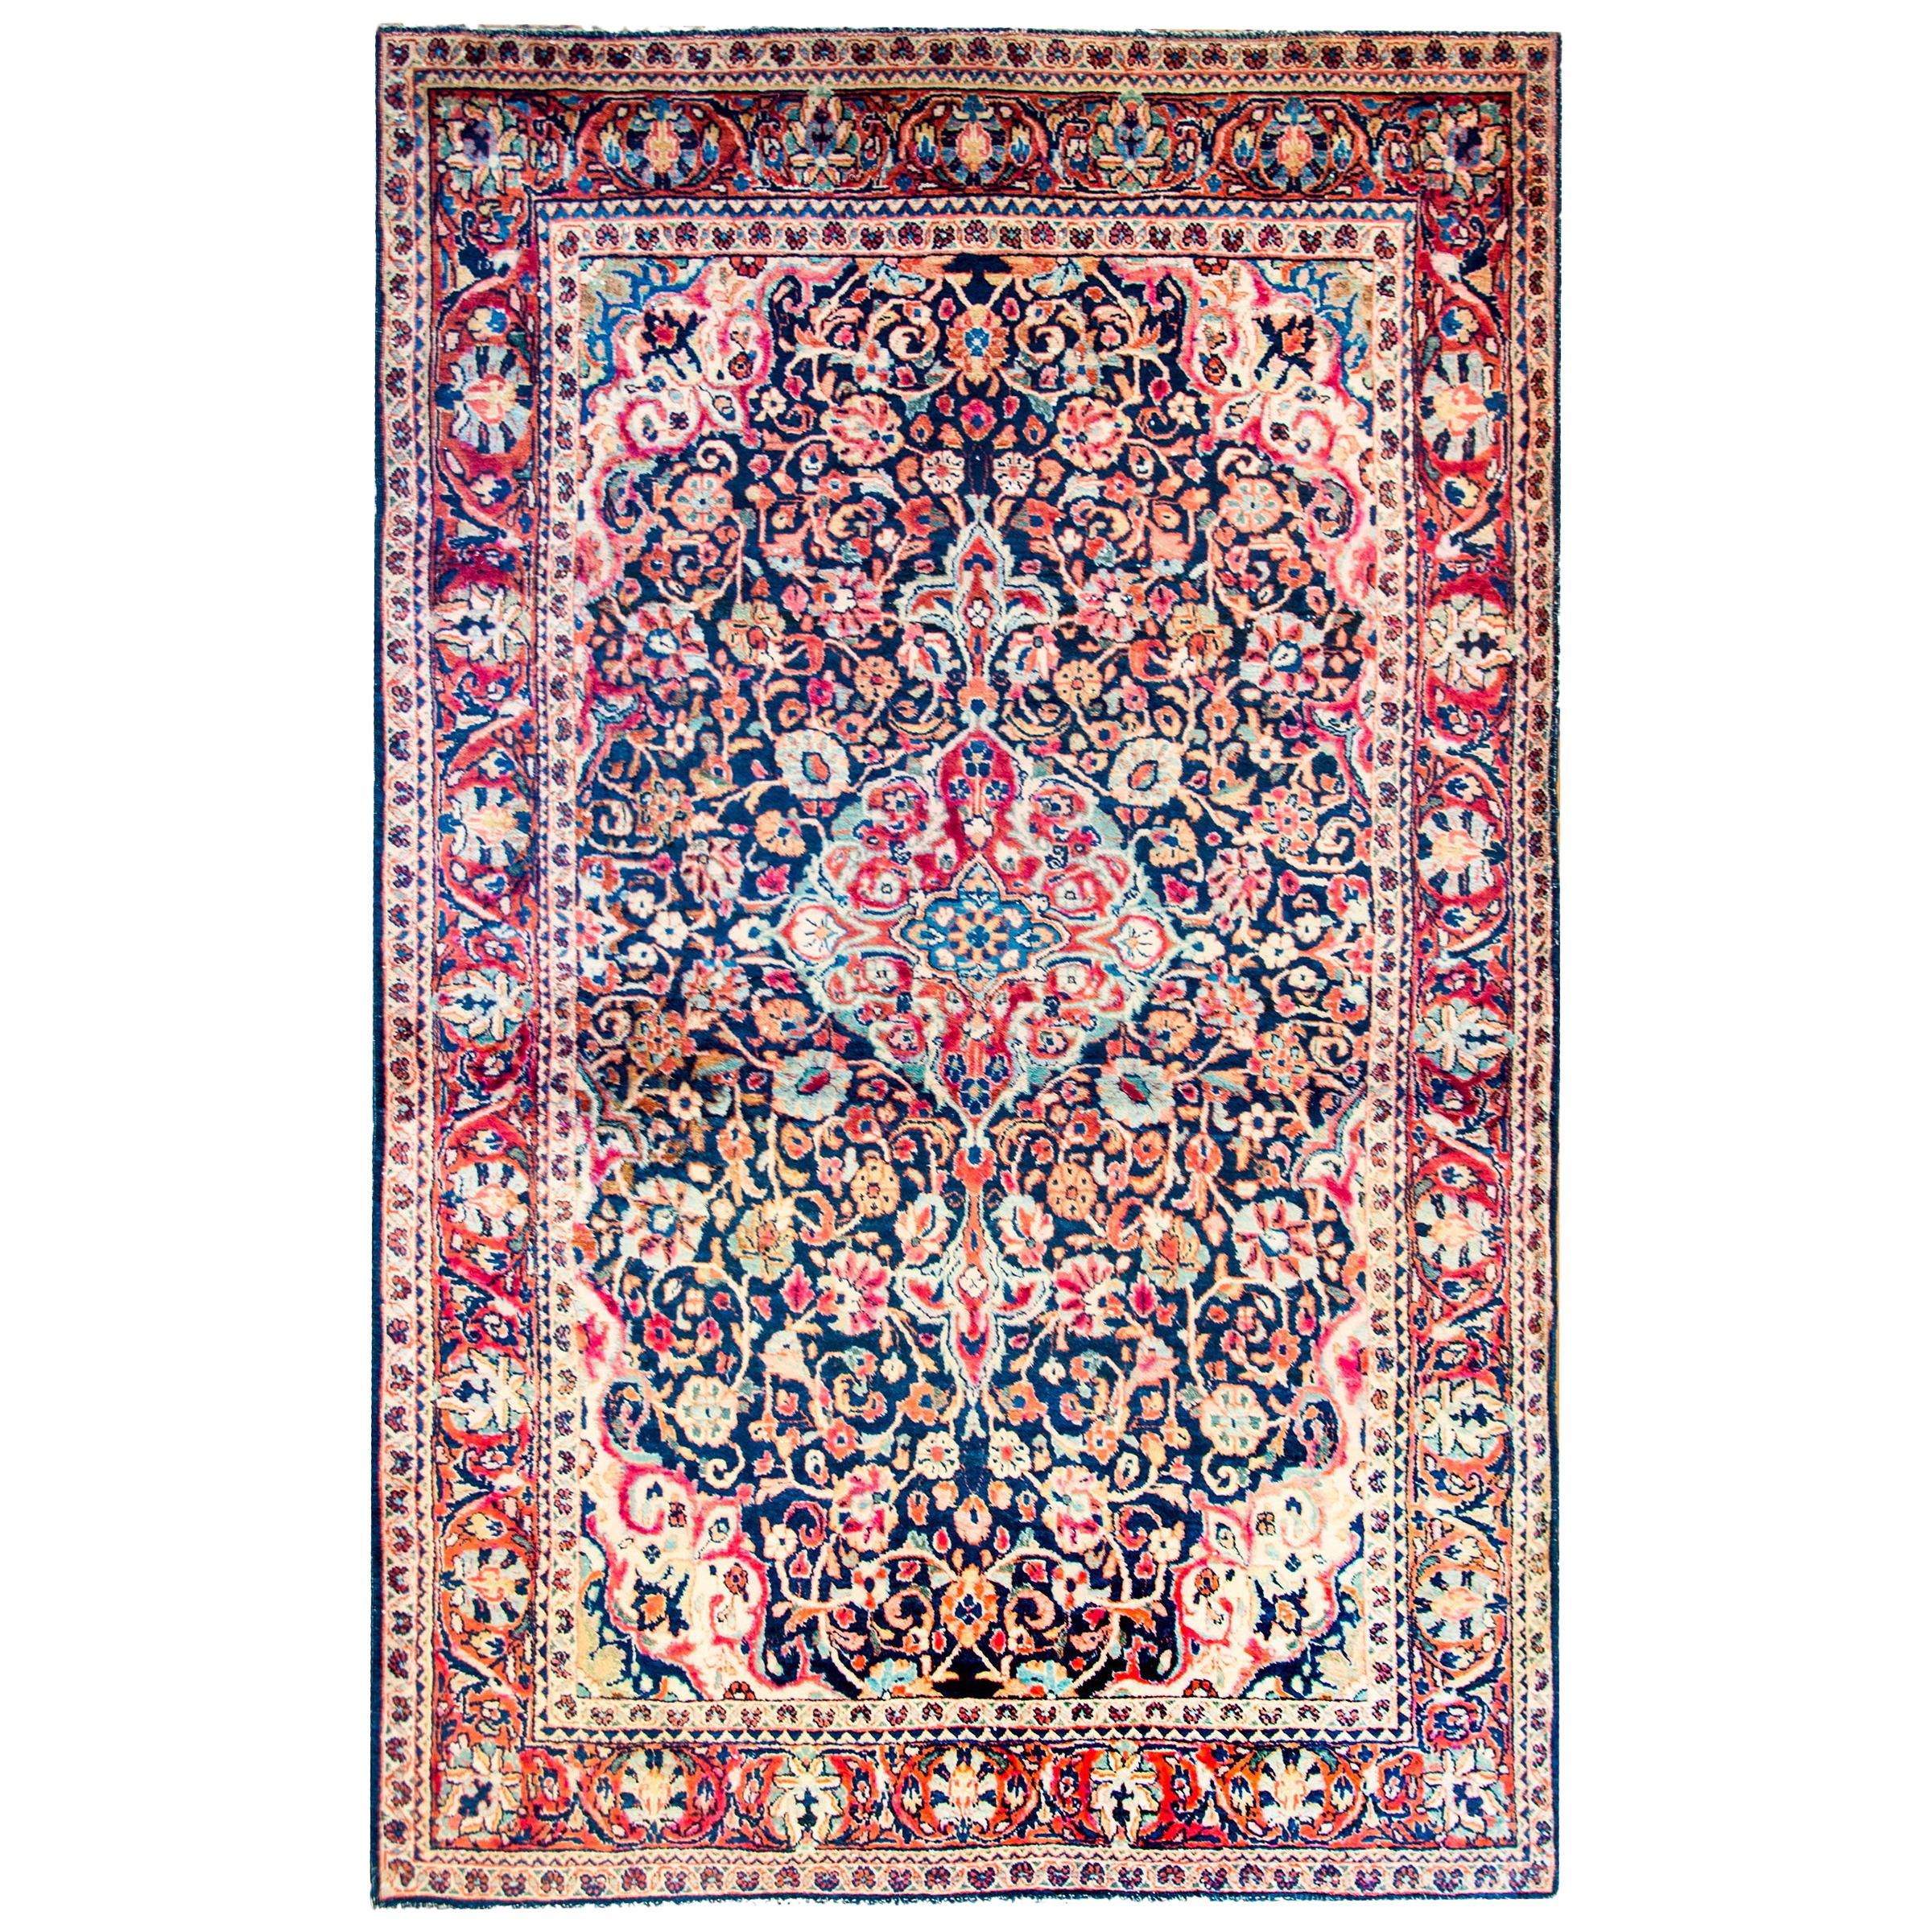 Exceptional Early 20th Century Antique Kashan Rug